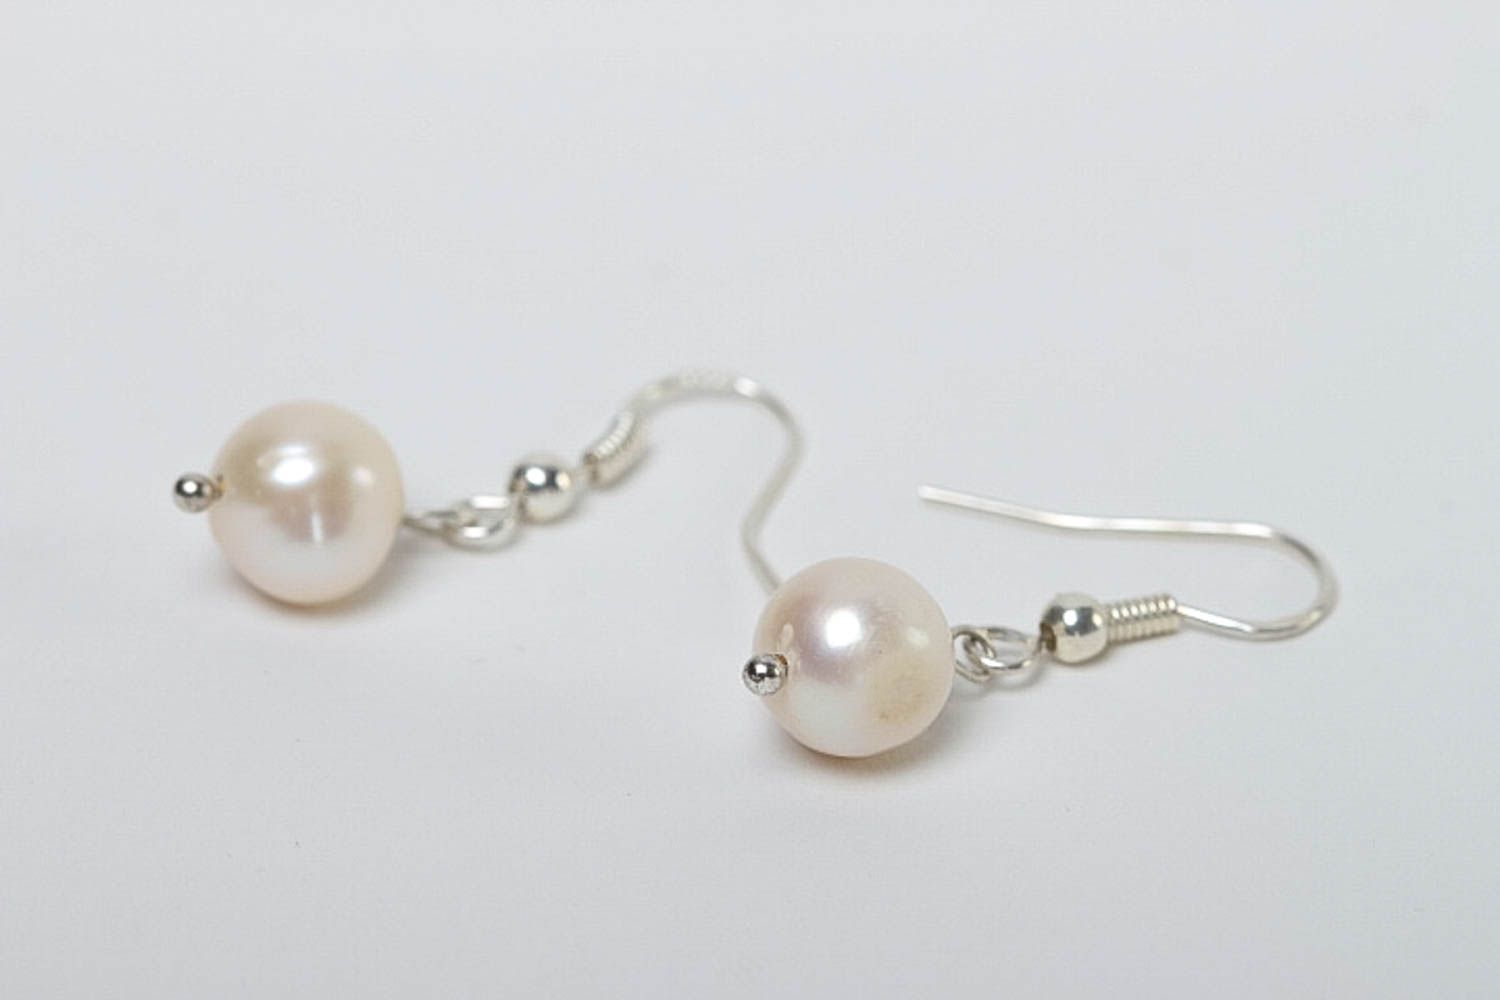 Handmade earrings with pearls earrings with charms designer accessories photo 3